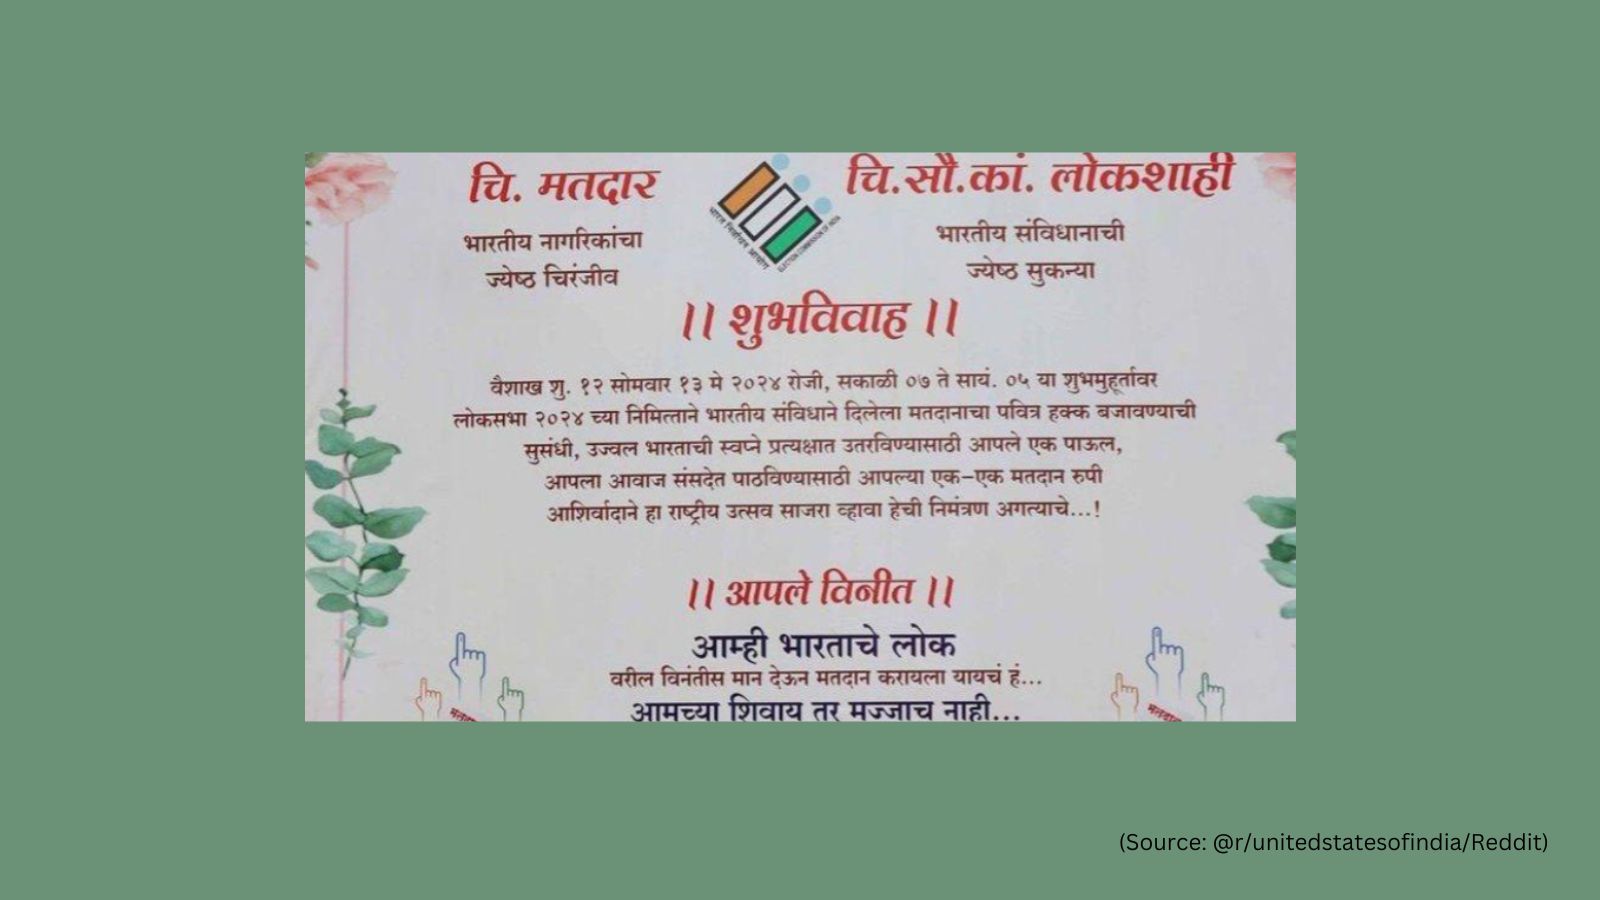 Lok Sabha Polls 2024: Wedding invitation card encouraging citizens to exercise voting rights goes viral | Trending News - The Indian Express